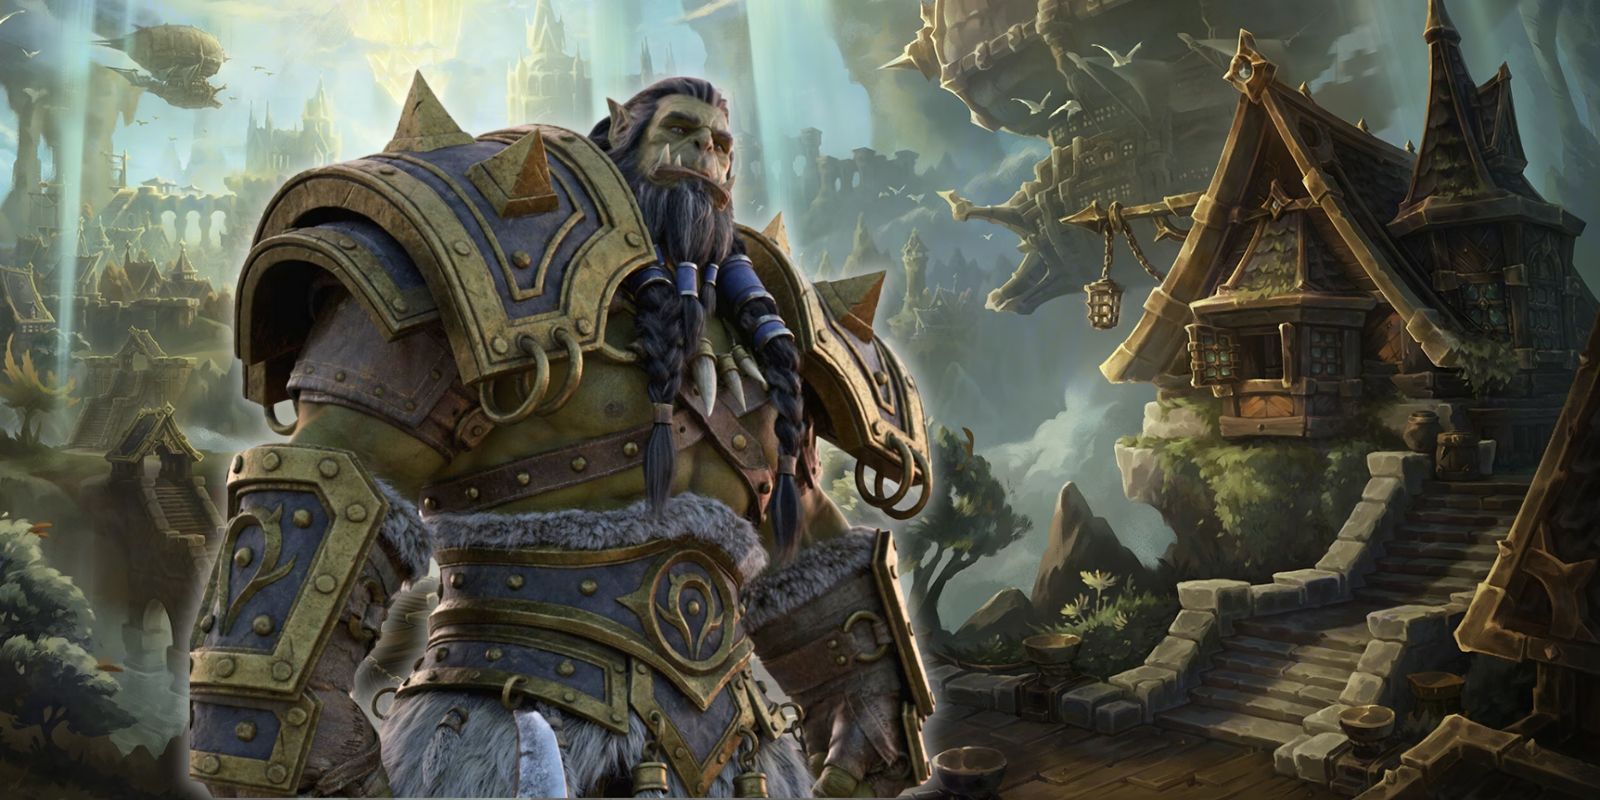 https://static1.srcdn.com/wordpress/wp-content/uploads/2024/01/world-of-warcraft-the-war-within-setting-with-a-peaceful-town-and-an-image-of-thrall-in-front.jpg